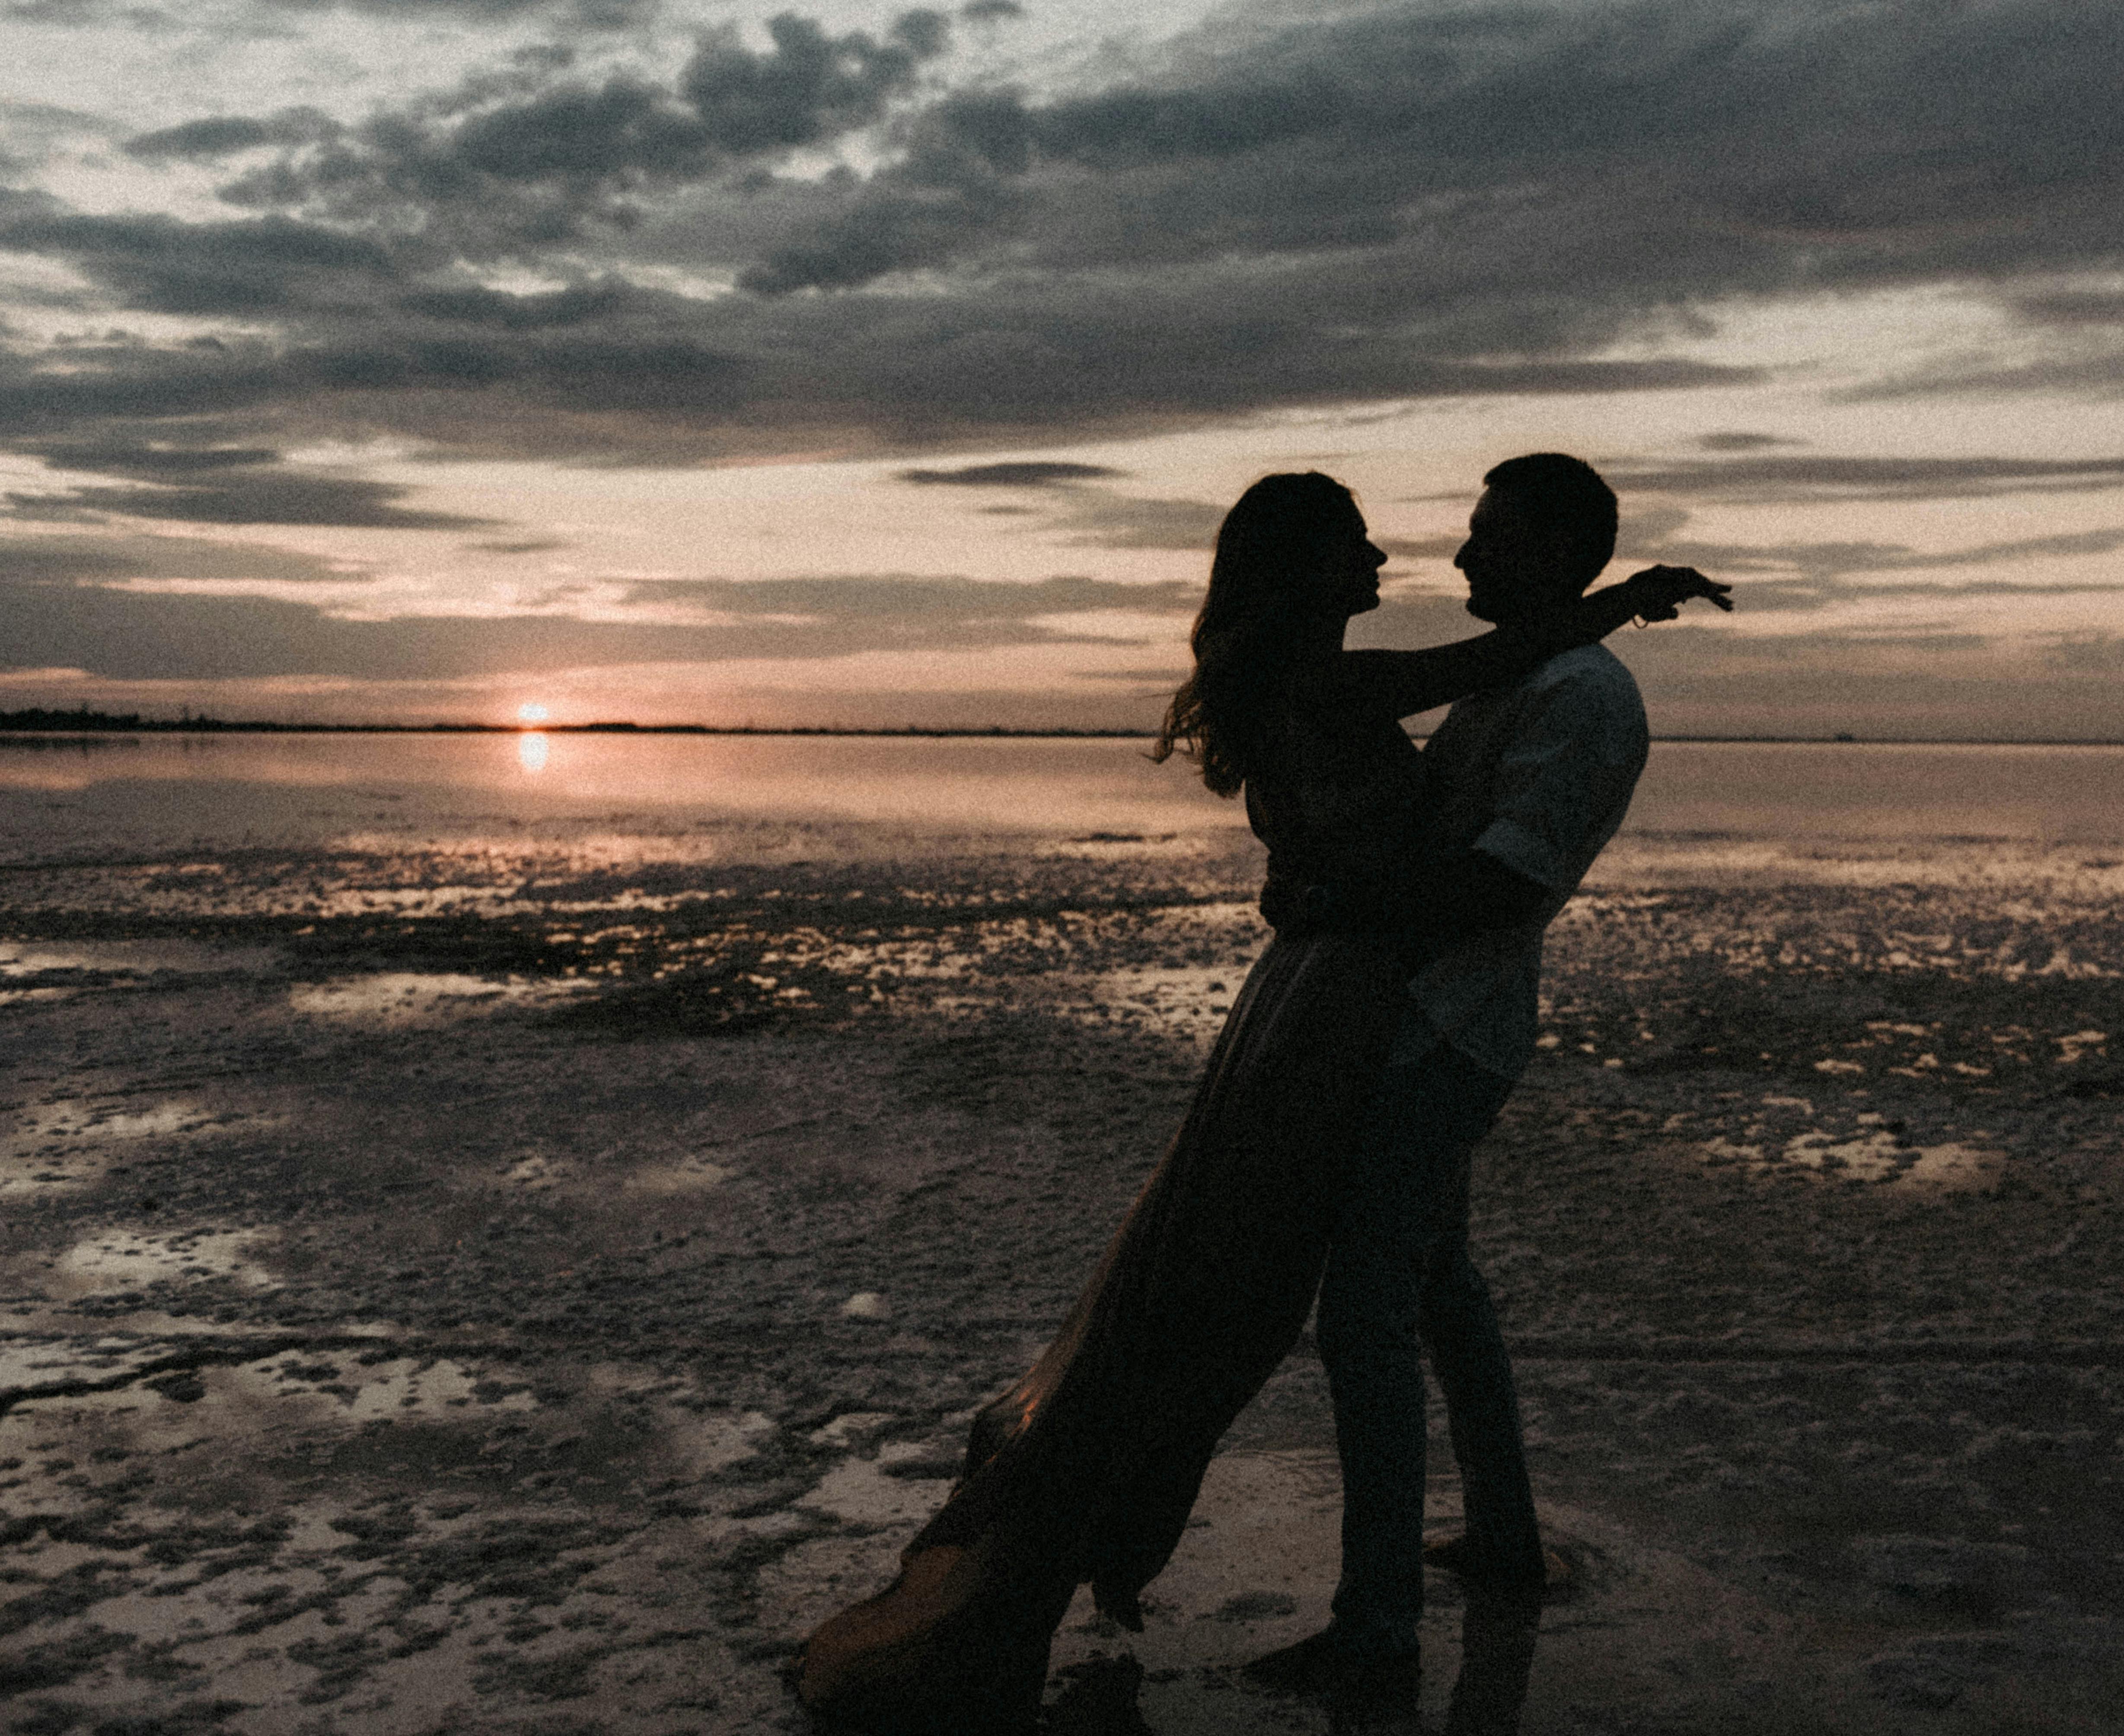 Couple dancing on the beach | Source: Pexels